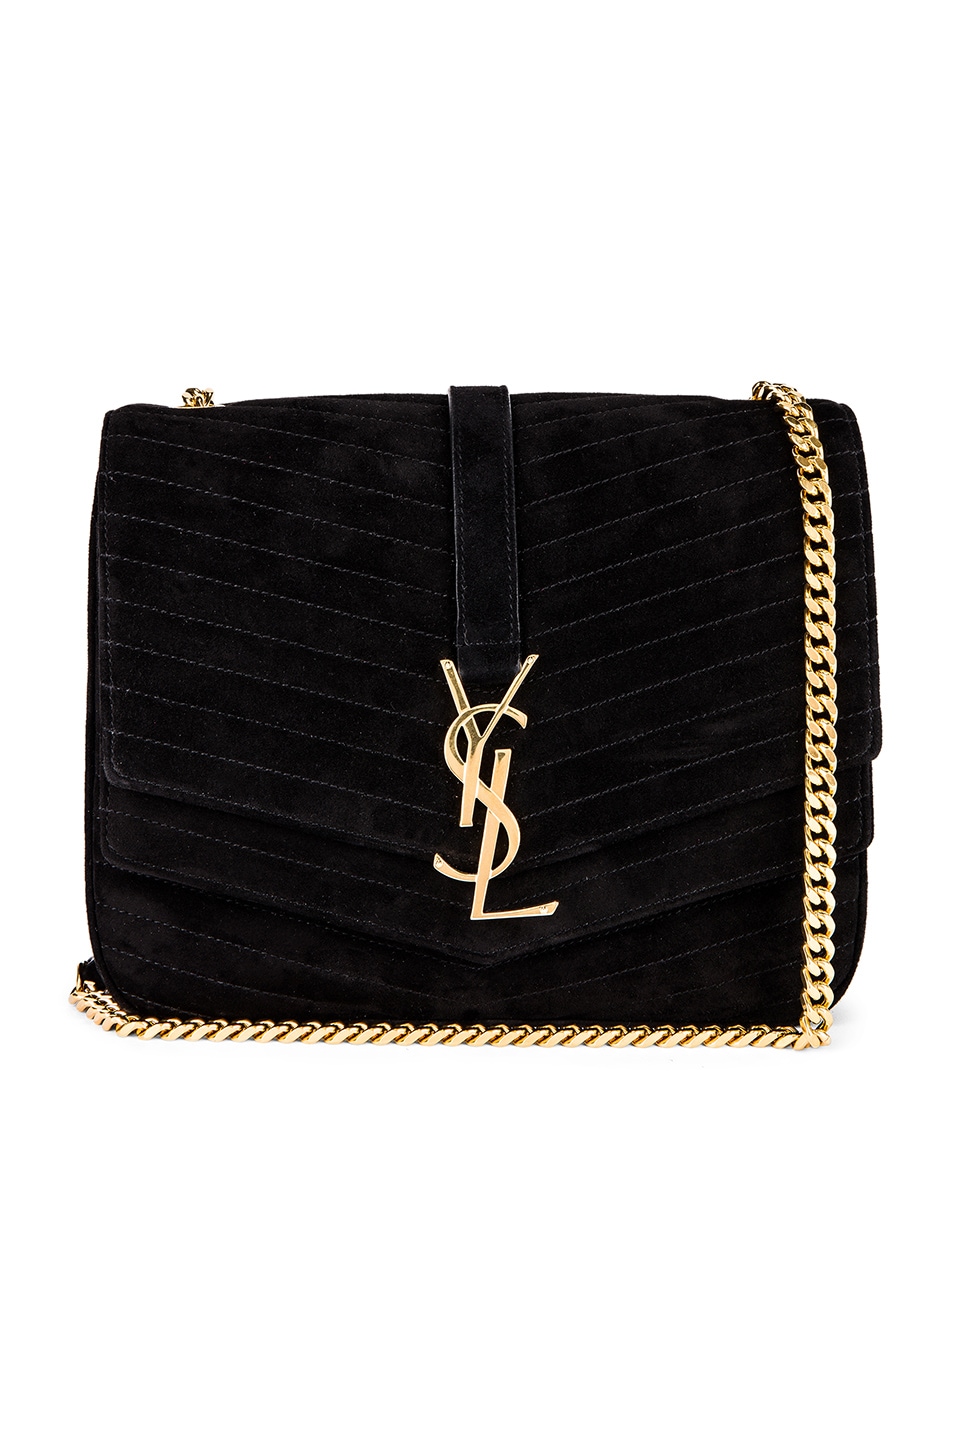 Image 1 of Saint Laurent Medium Sulpice Chain Suede Quilted Bag in Black